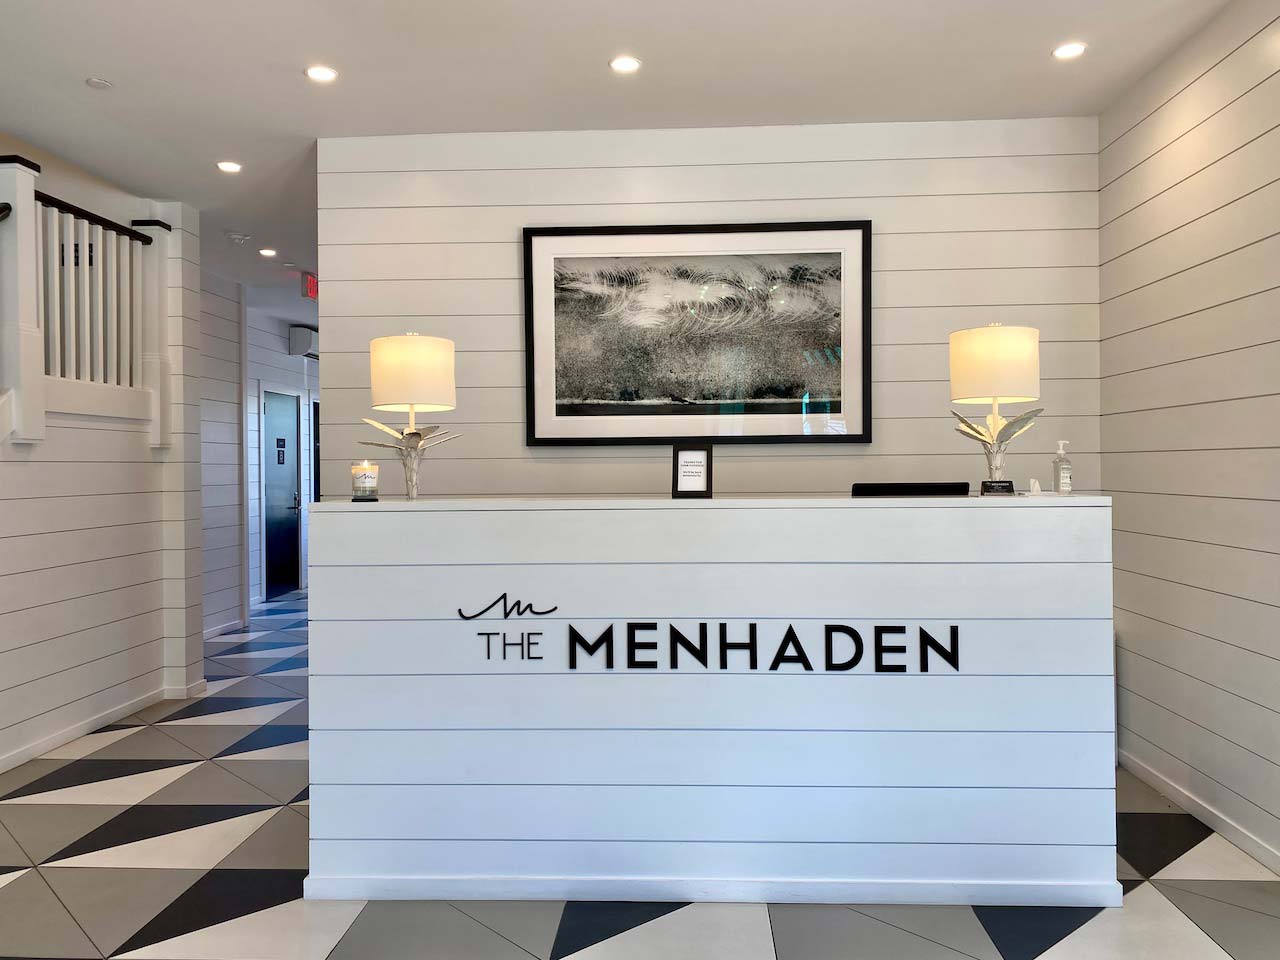 The Menhaden Pronounced Men-Hay-Den — it's another name for Bunker fish, vitally important to East End fishing